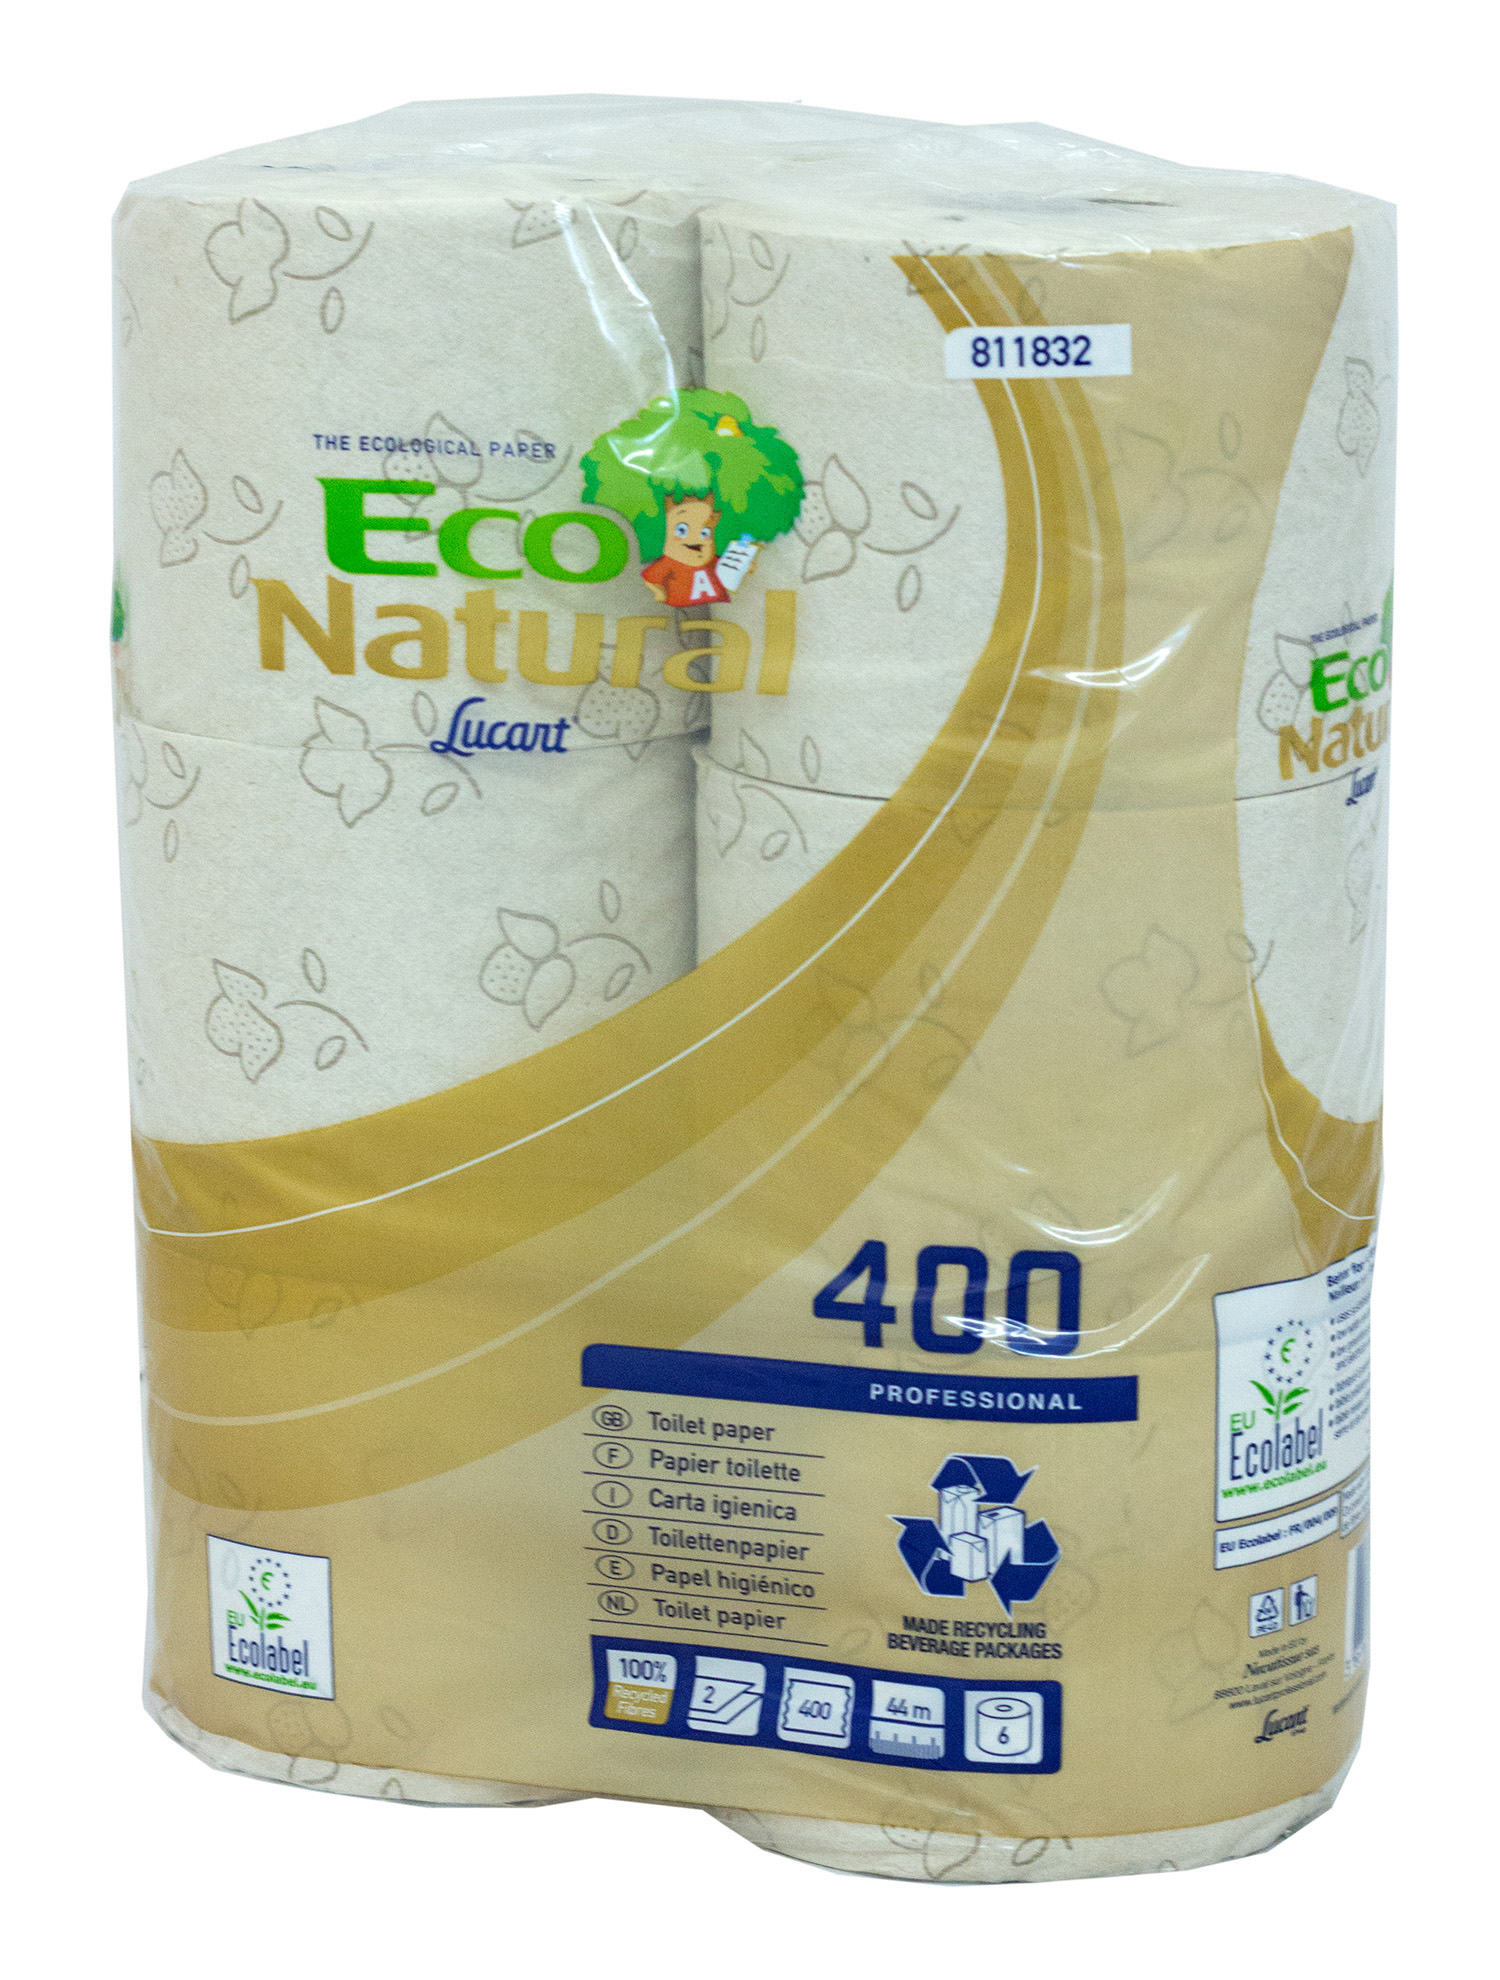 Eco Natural Recycled Toilet Rolls 2Ply 400 Sheets 30 Rolls